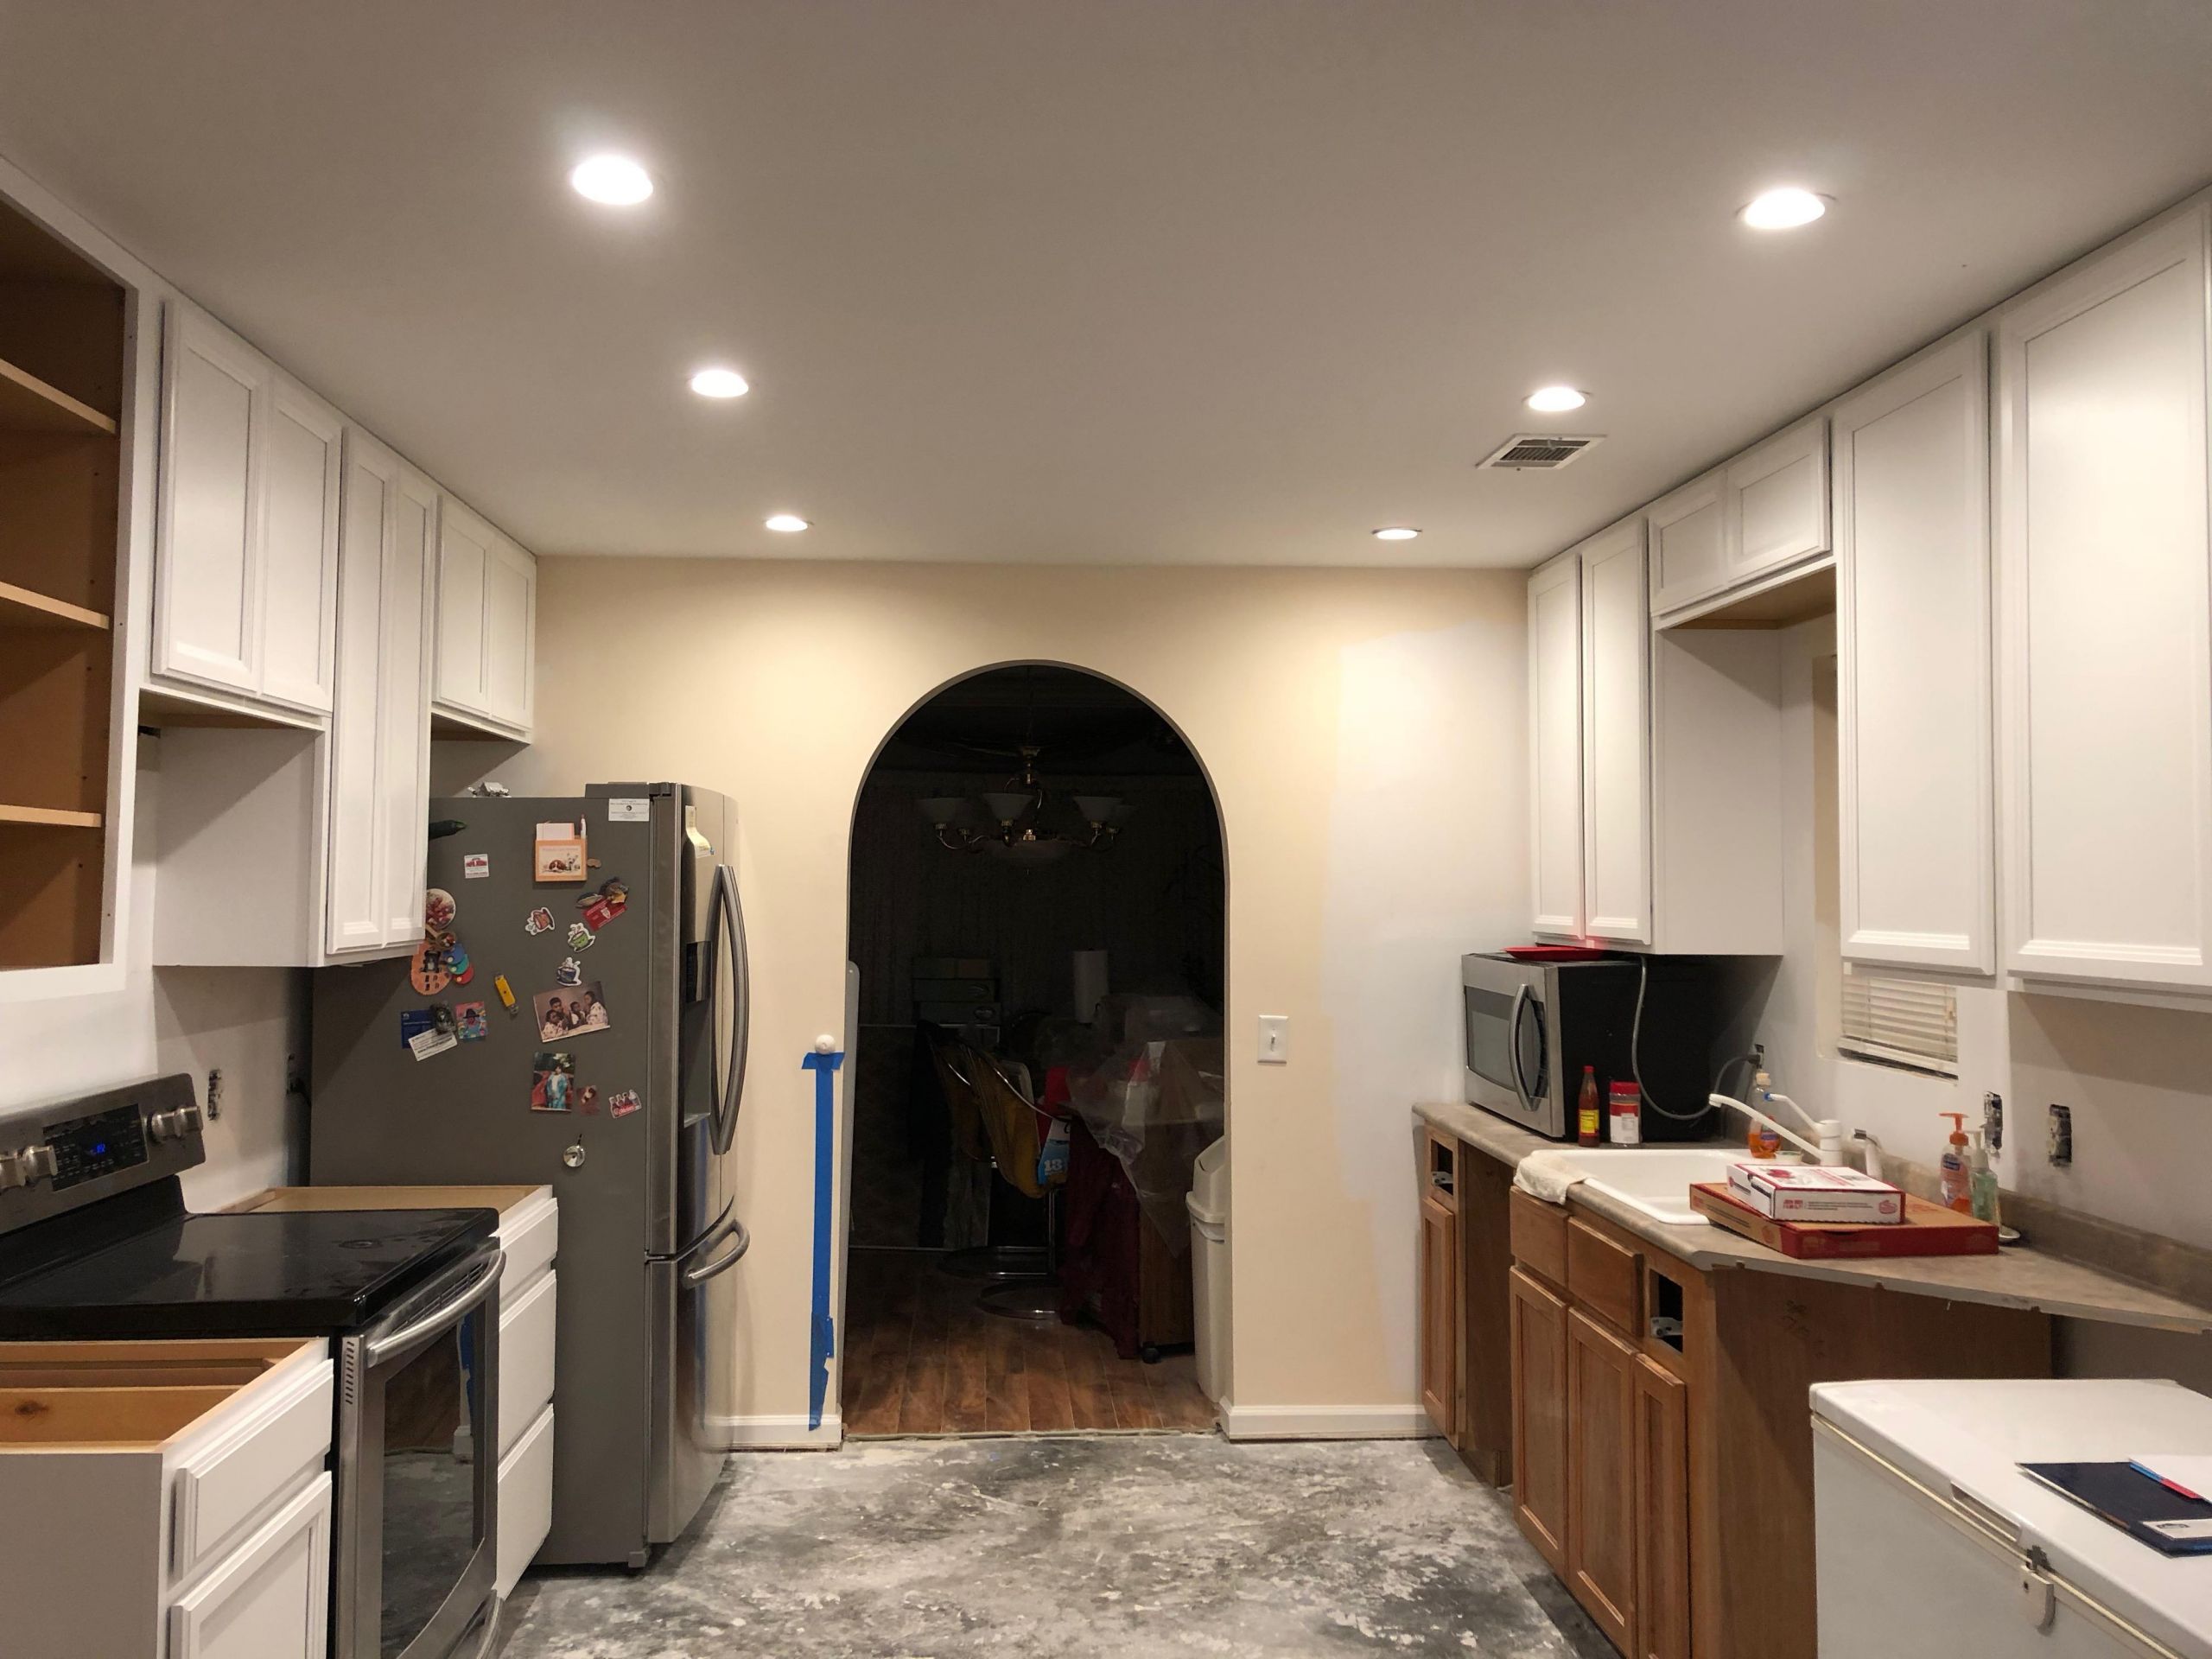 Lowes Kitchen Remodel Reviews
 Lowes Kitchen Remodeling Reviews